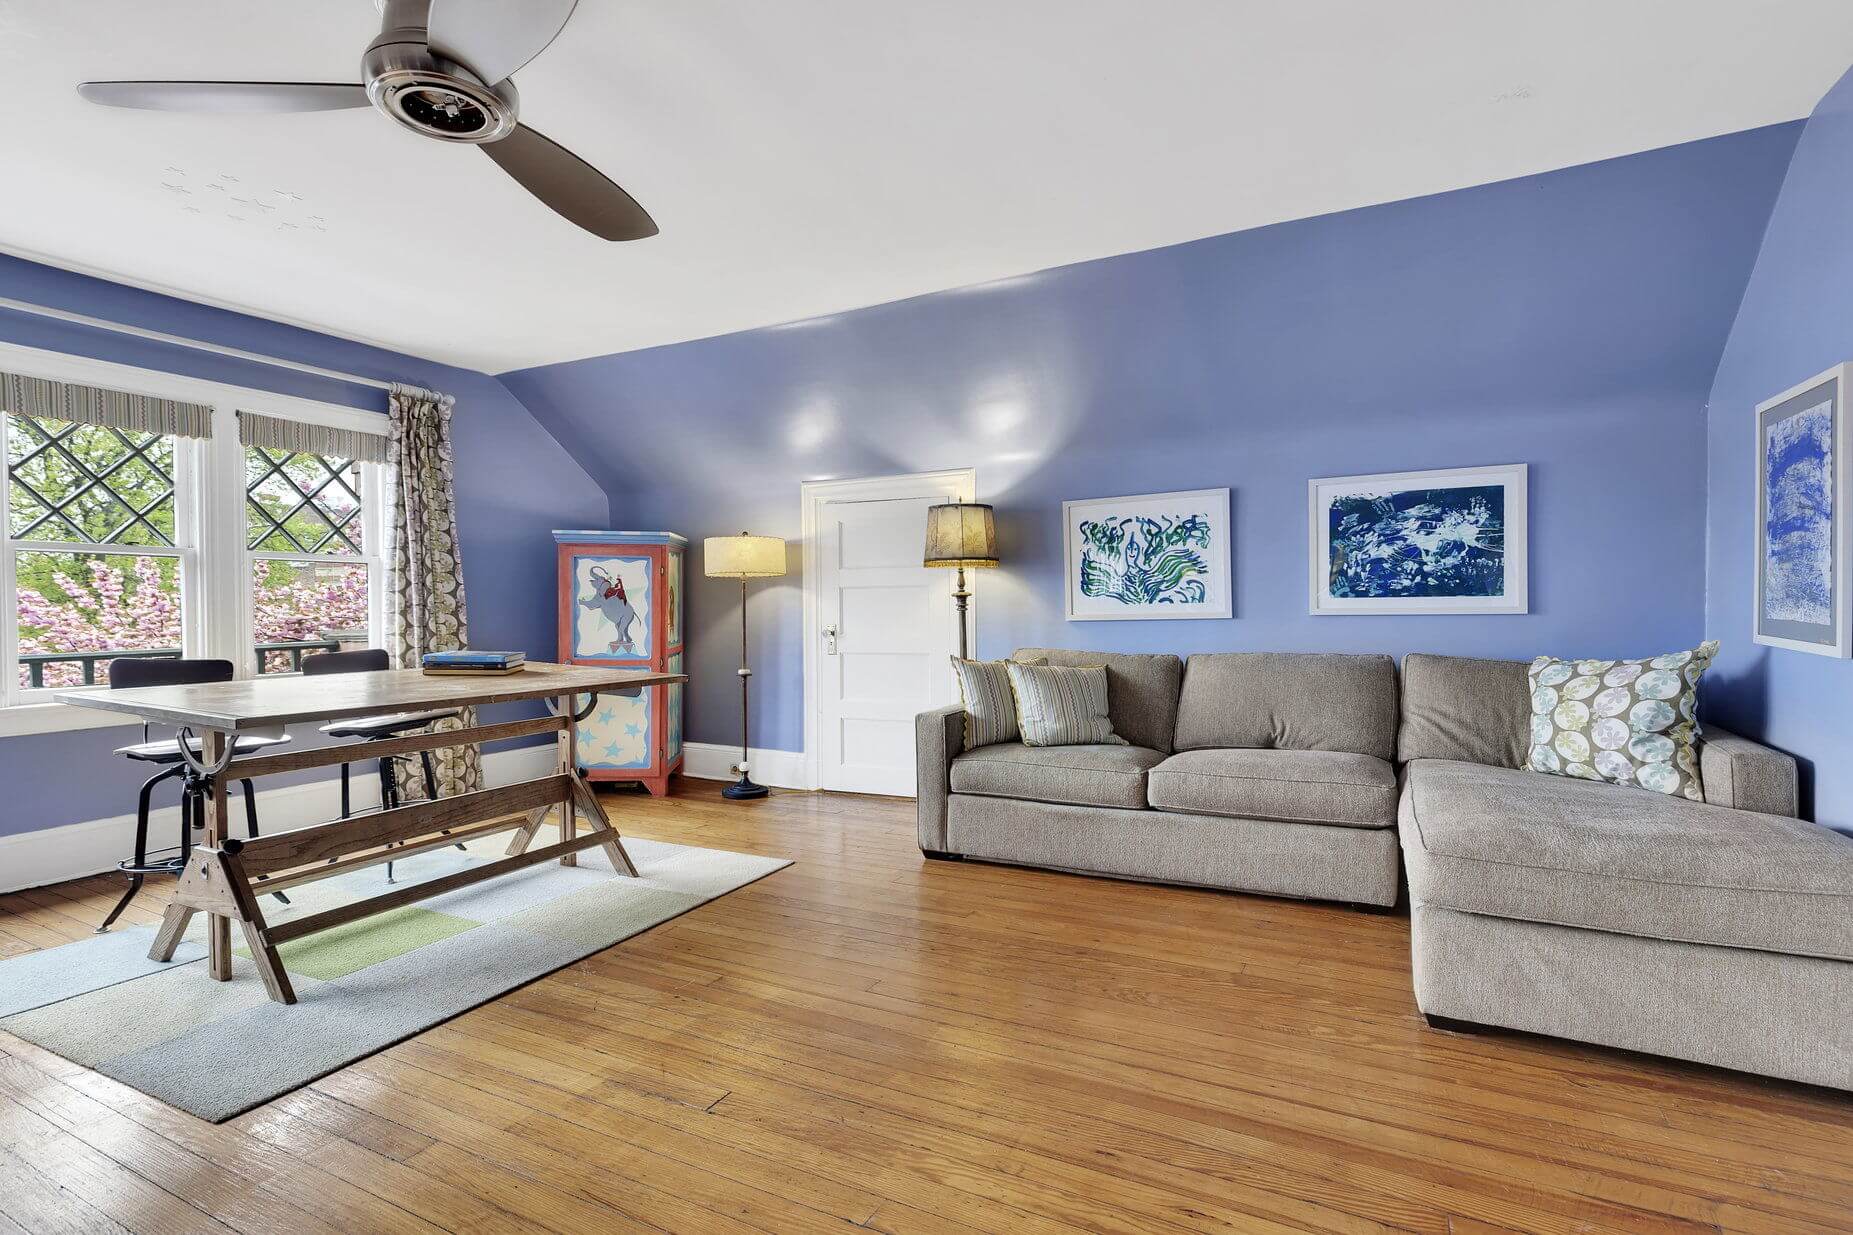 Brooklyn Homes for Sale in Prospect Park South at 85 Argyle Road